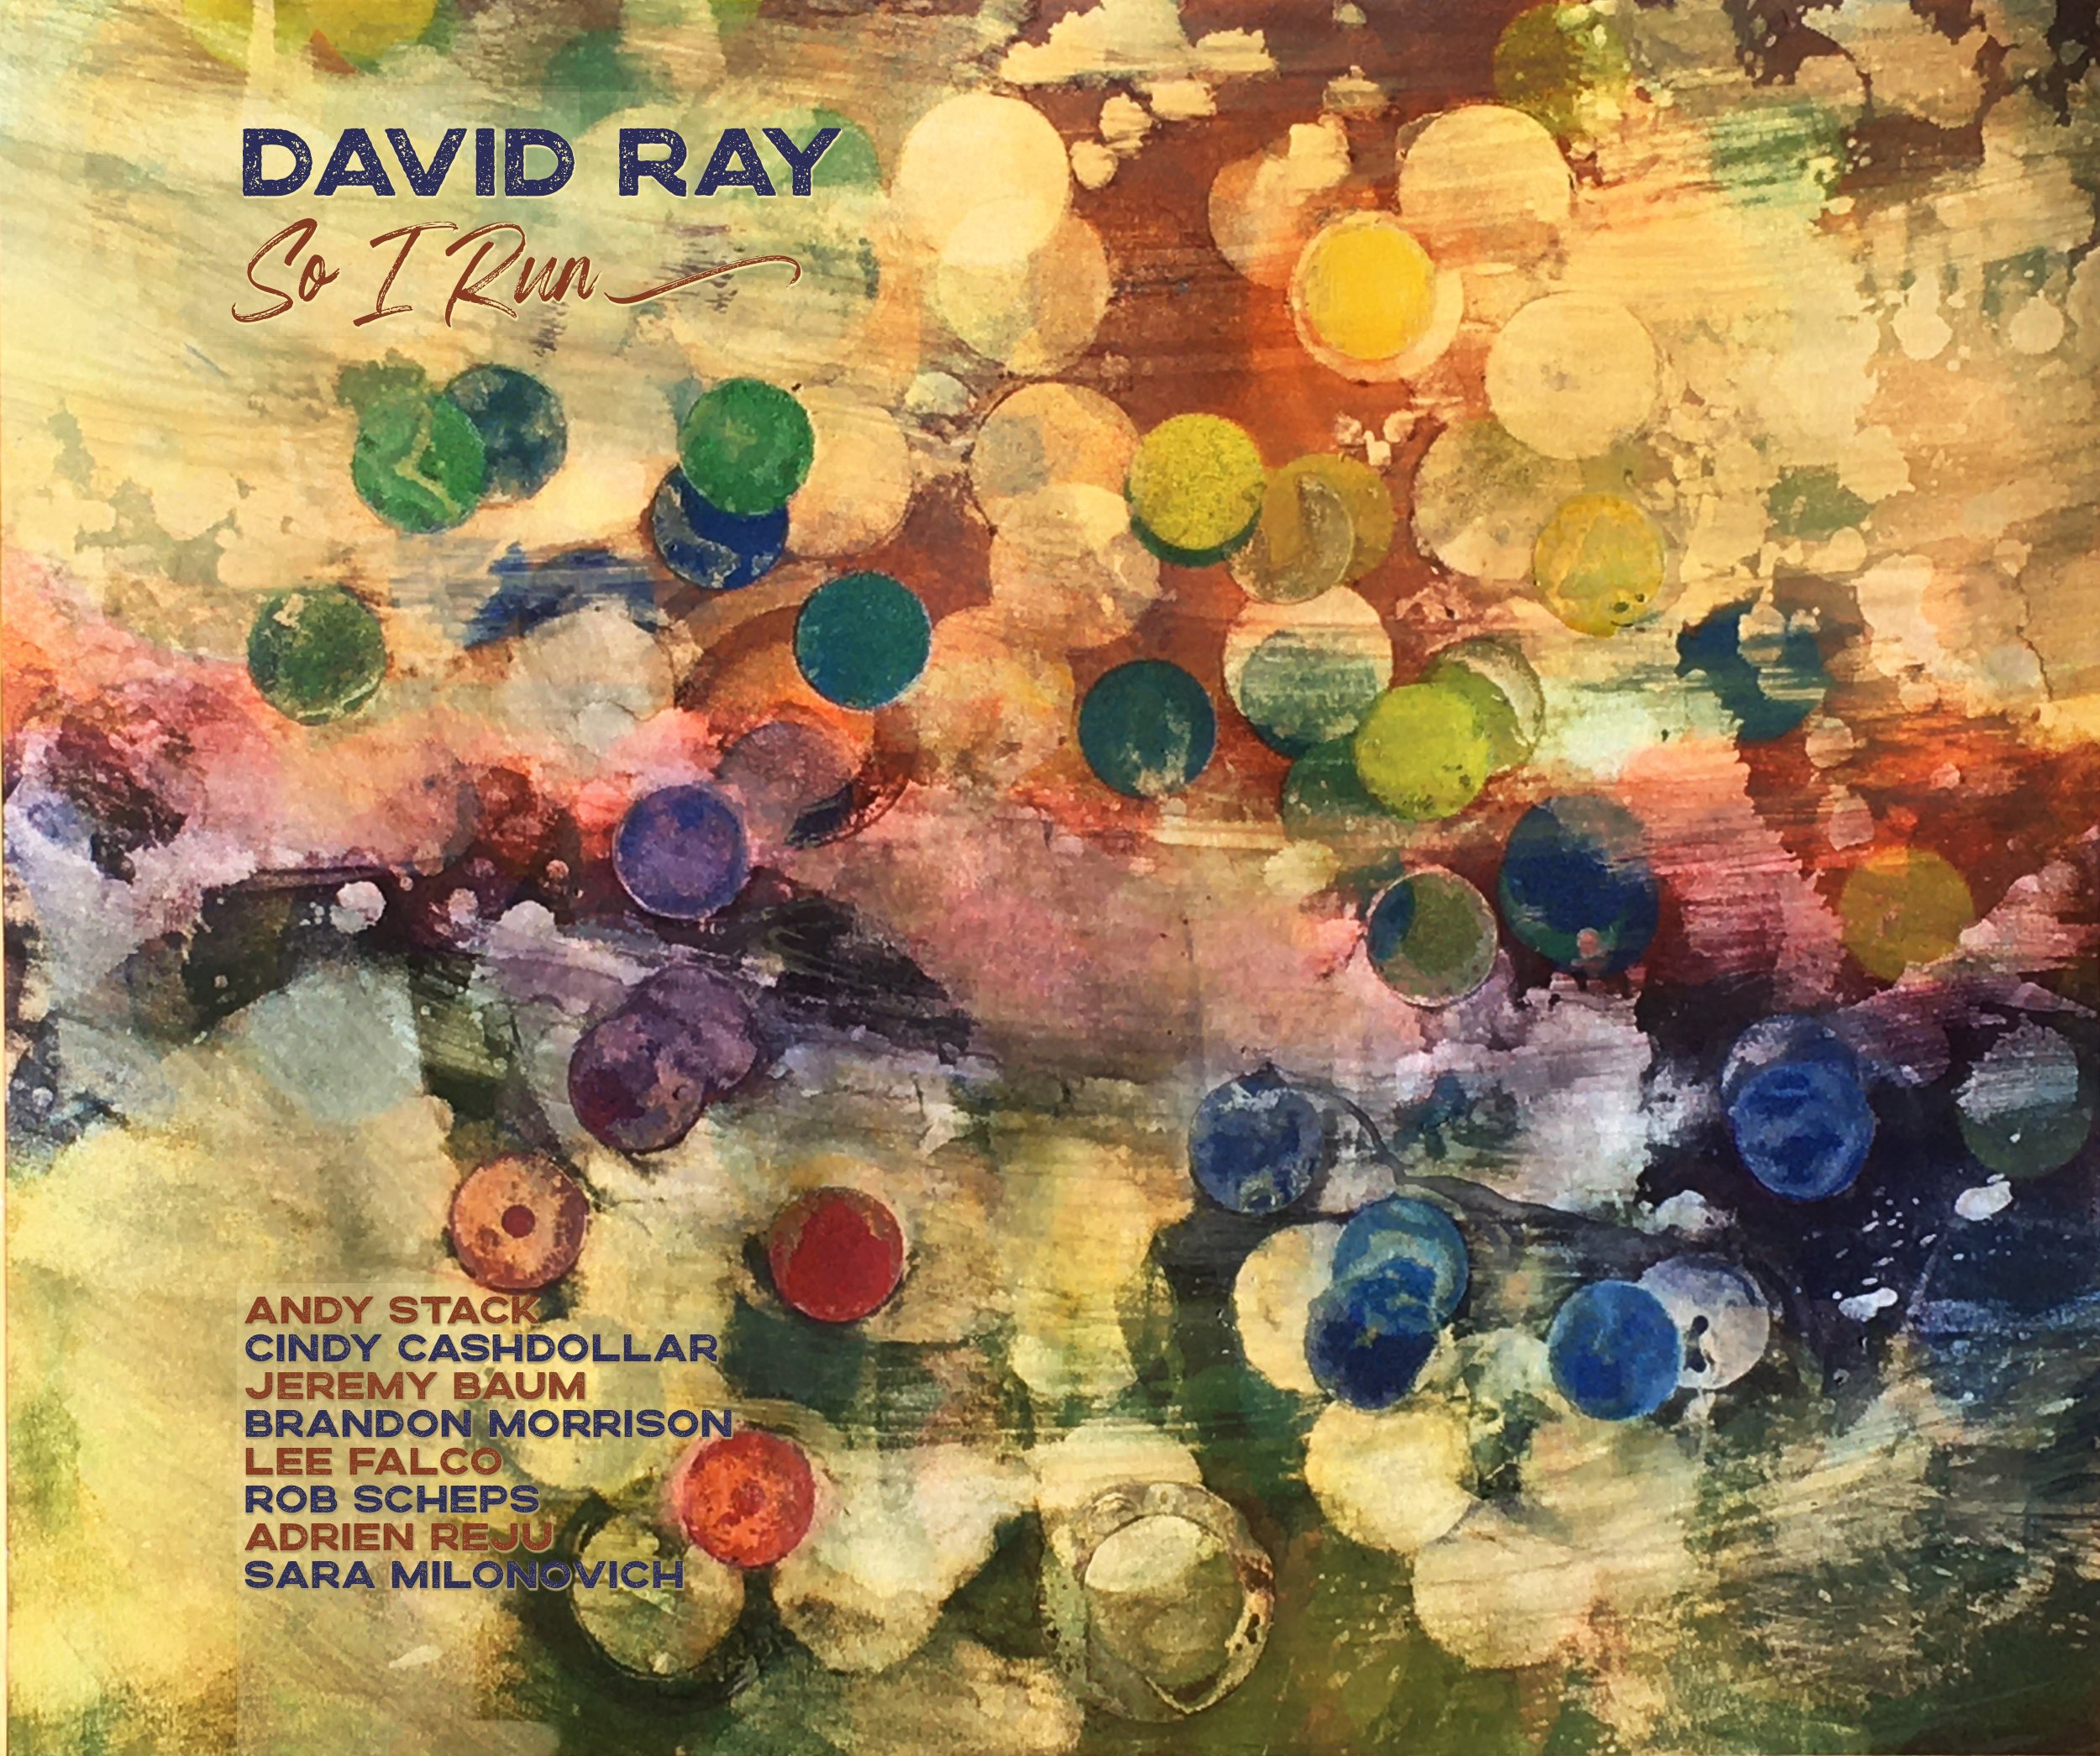 Art for Possession with Intent to Sell by David Ray